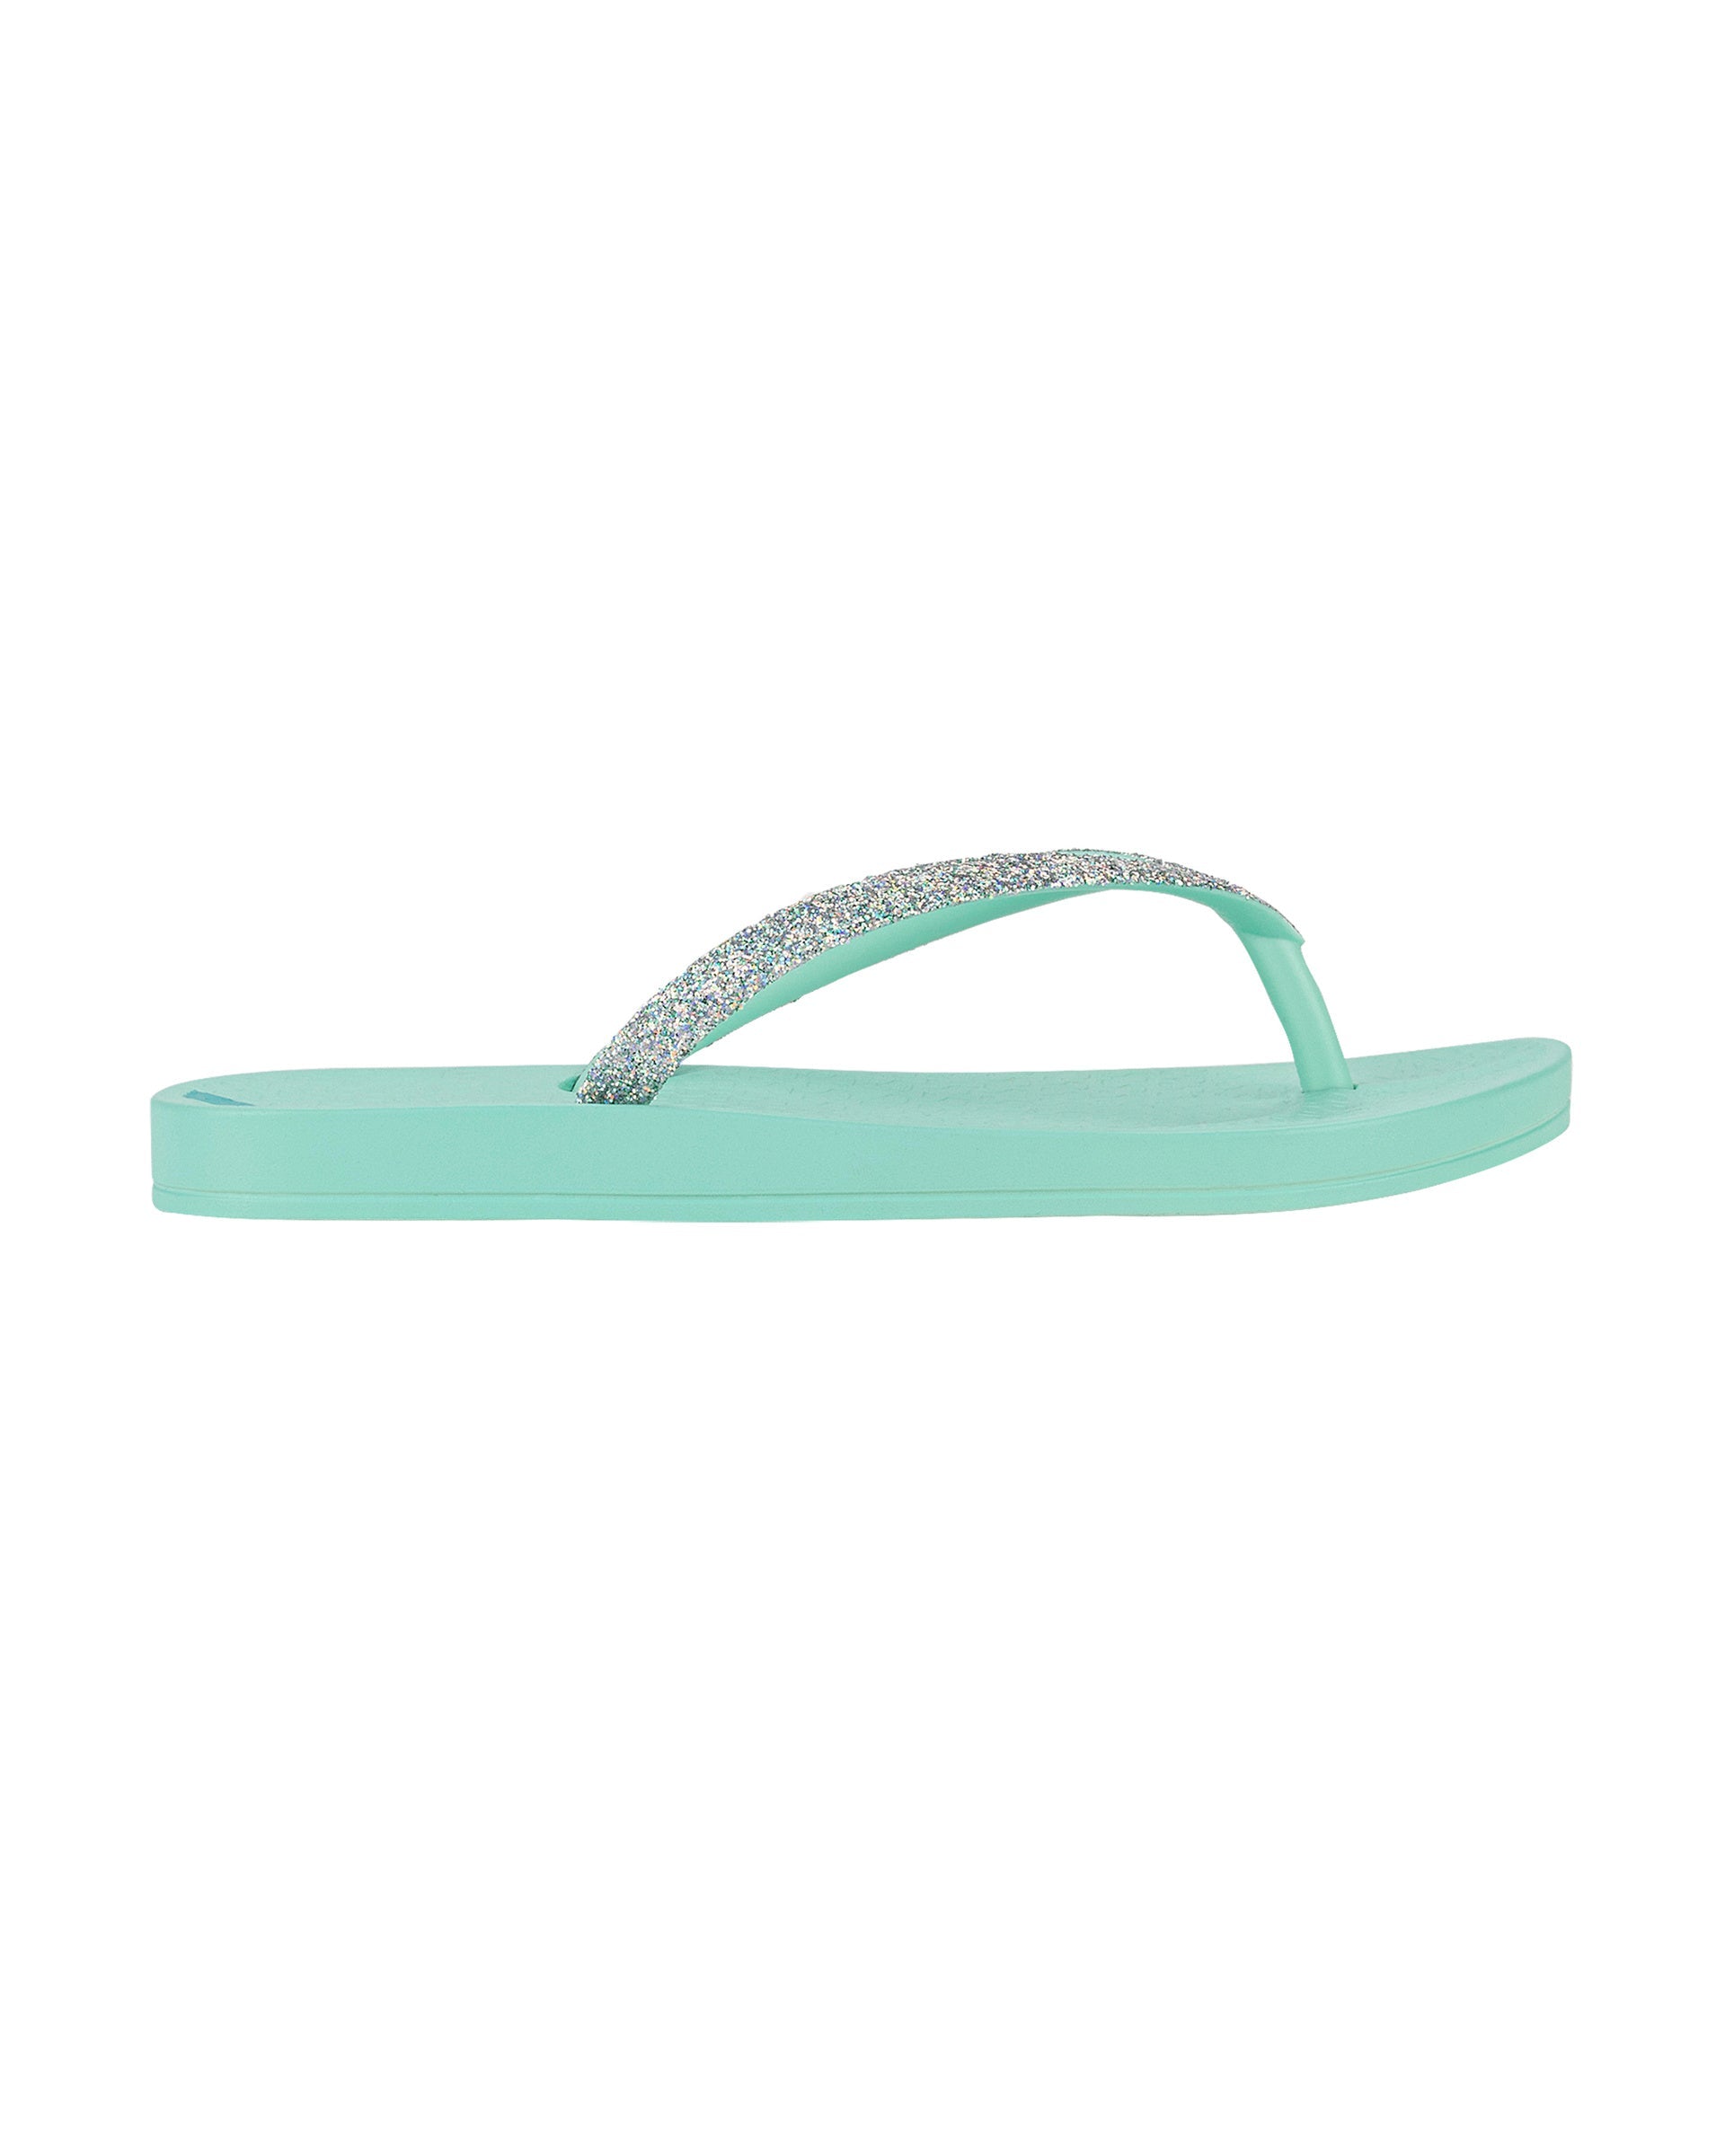 Outer side view of a green Ipanema Ana Sparkle kids flip flop with silver glitter strap.